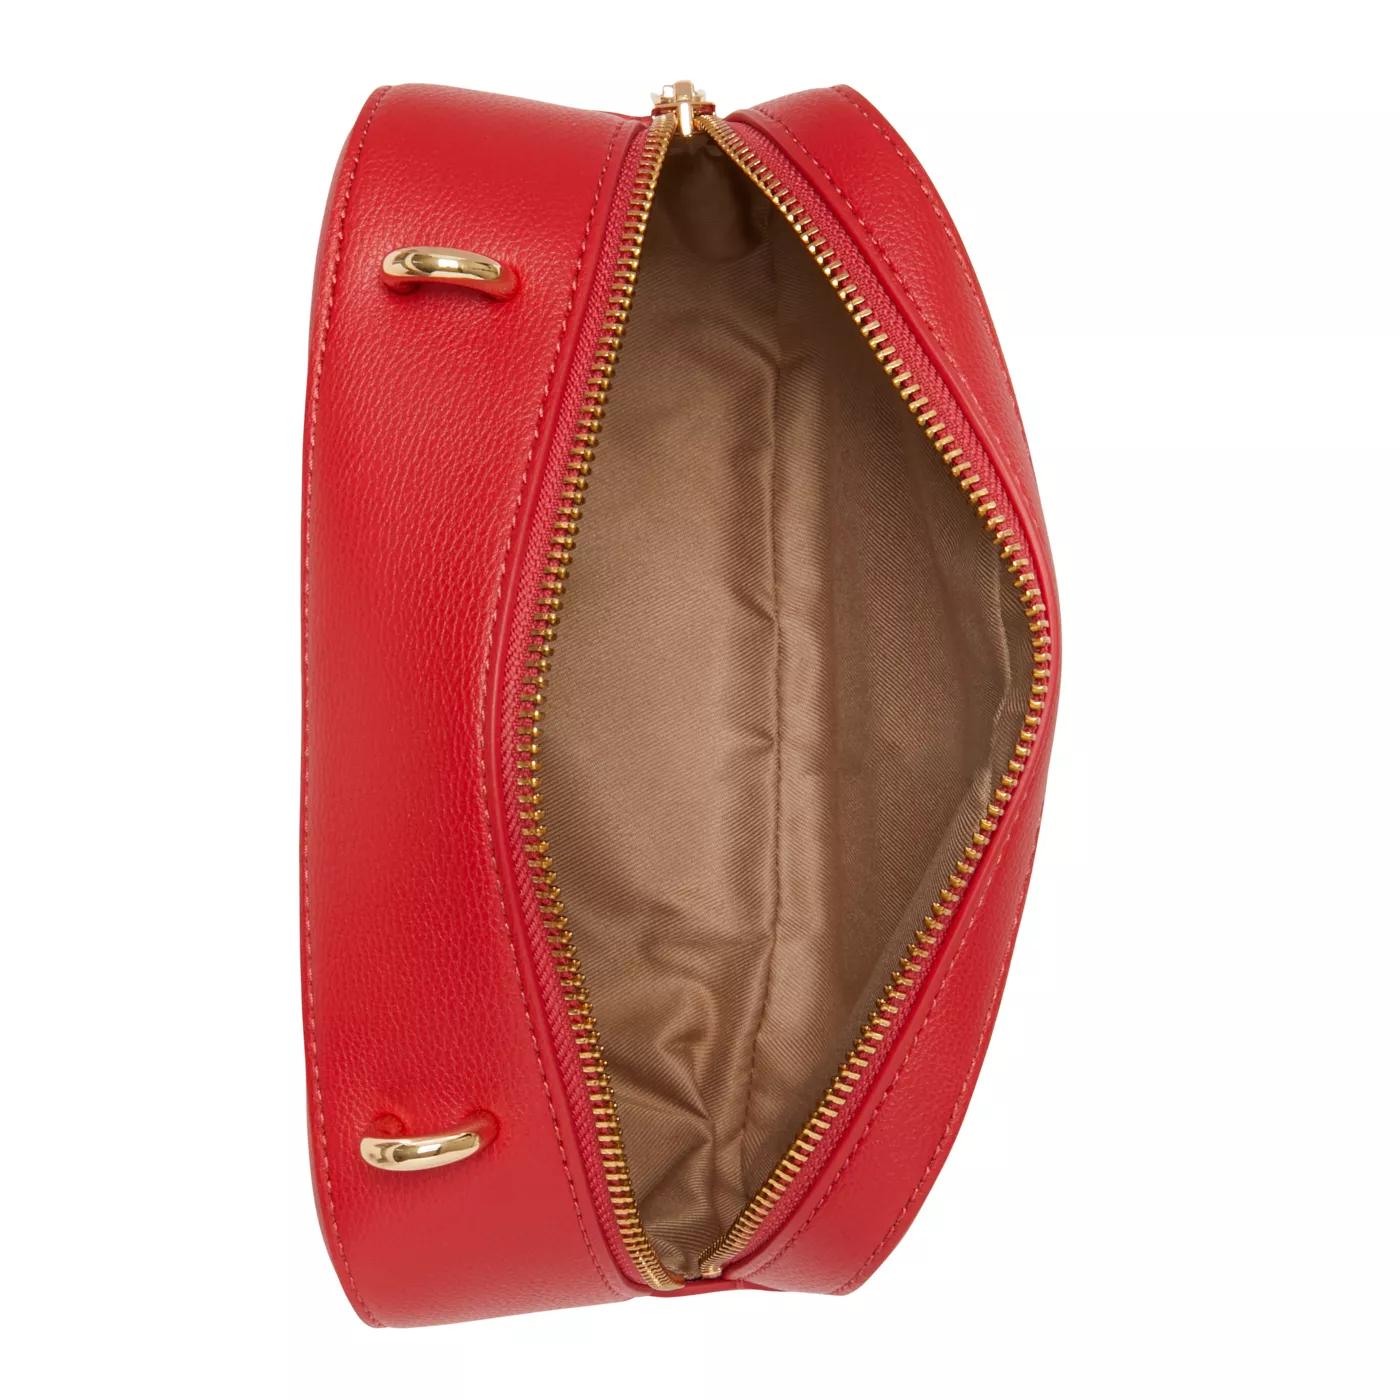 Love Moschino Crossbody bags Natural Rote Umhängetasche JC4148PP1 in rood